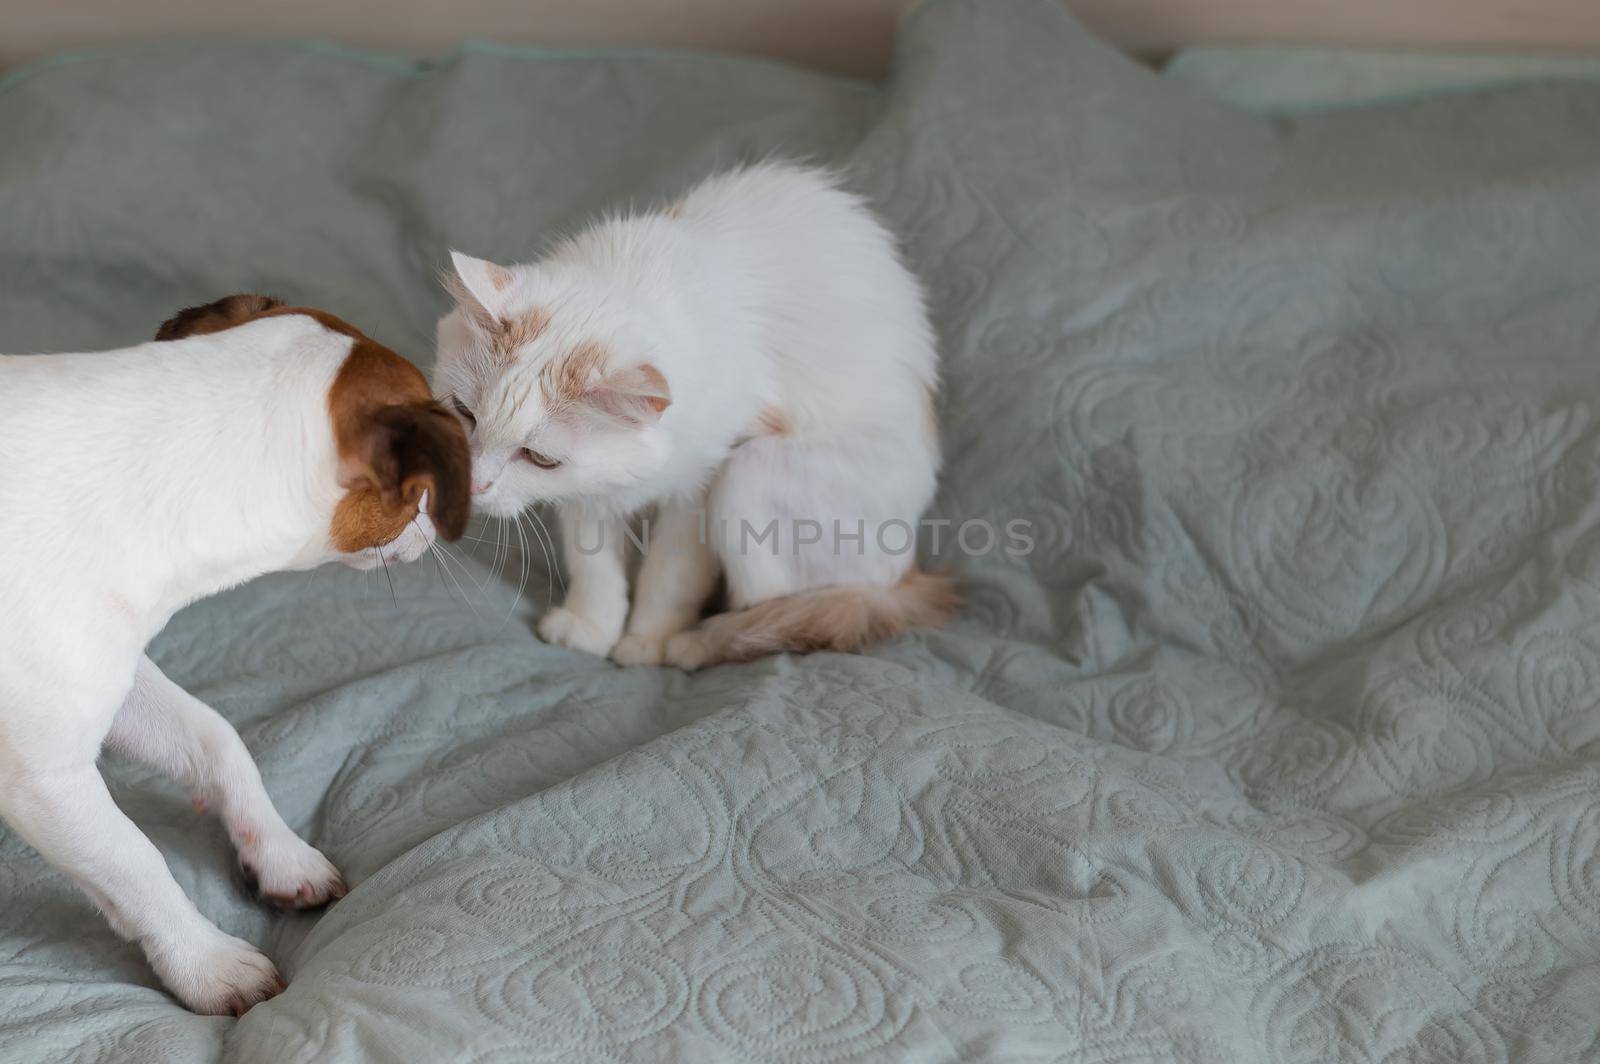 Jack russell terrier dog and irritated white cat on the bed